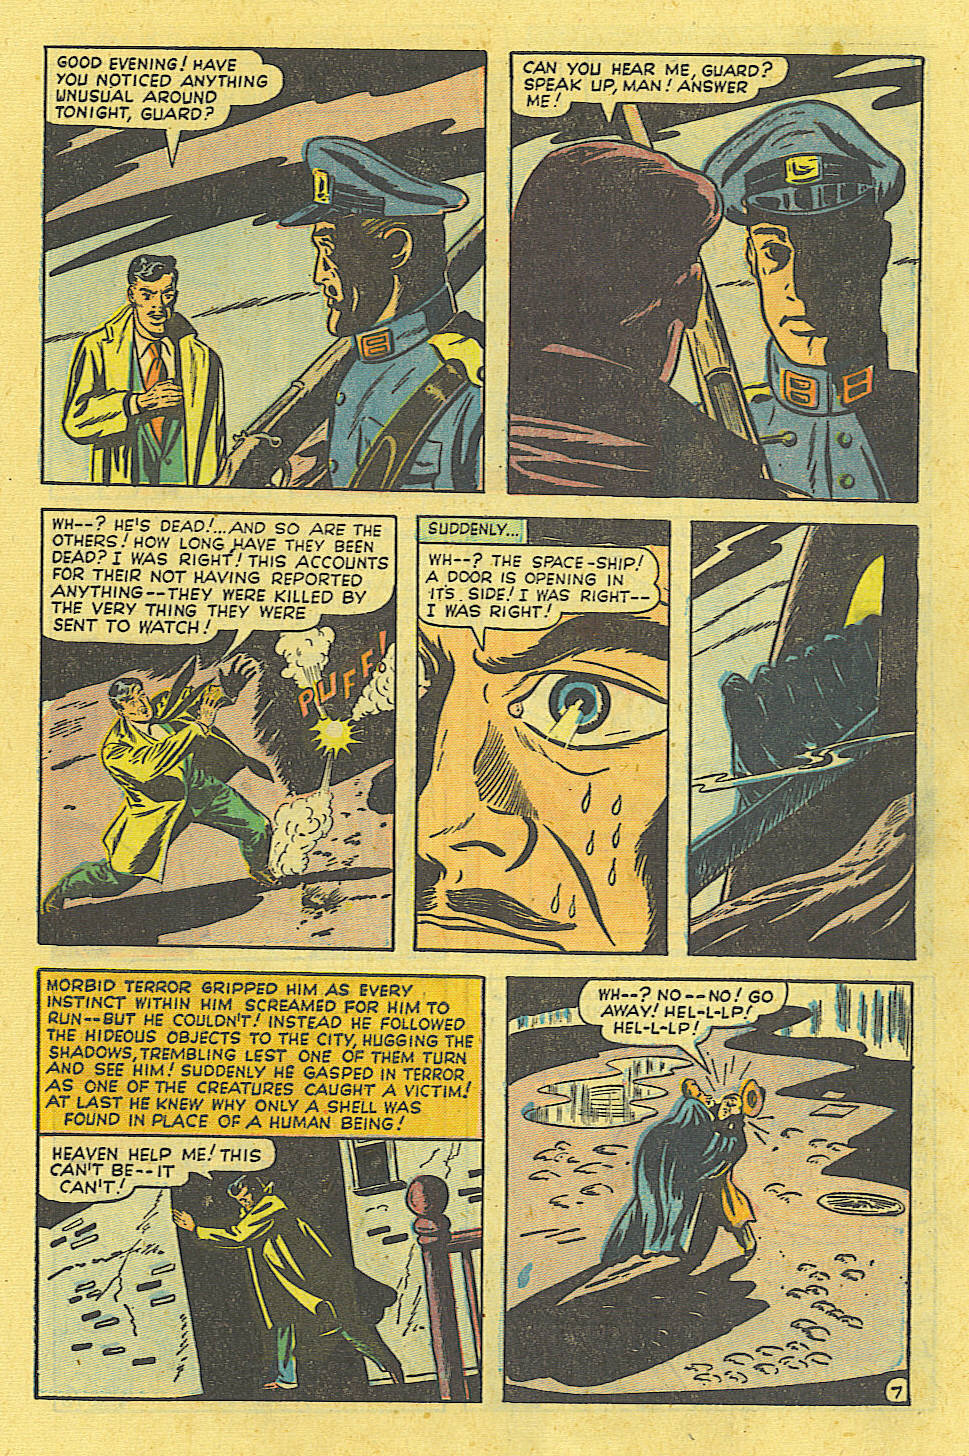 Marvel Tales (1949) 95 Page 7